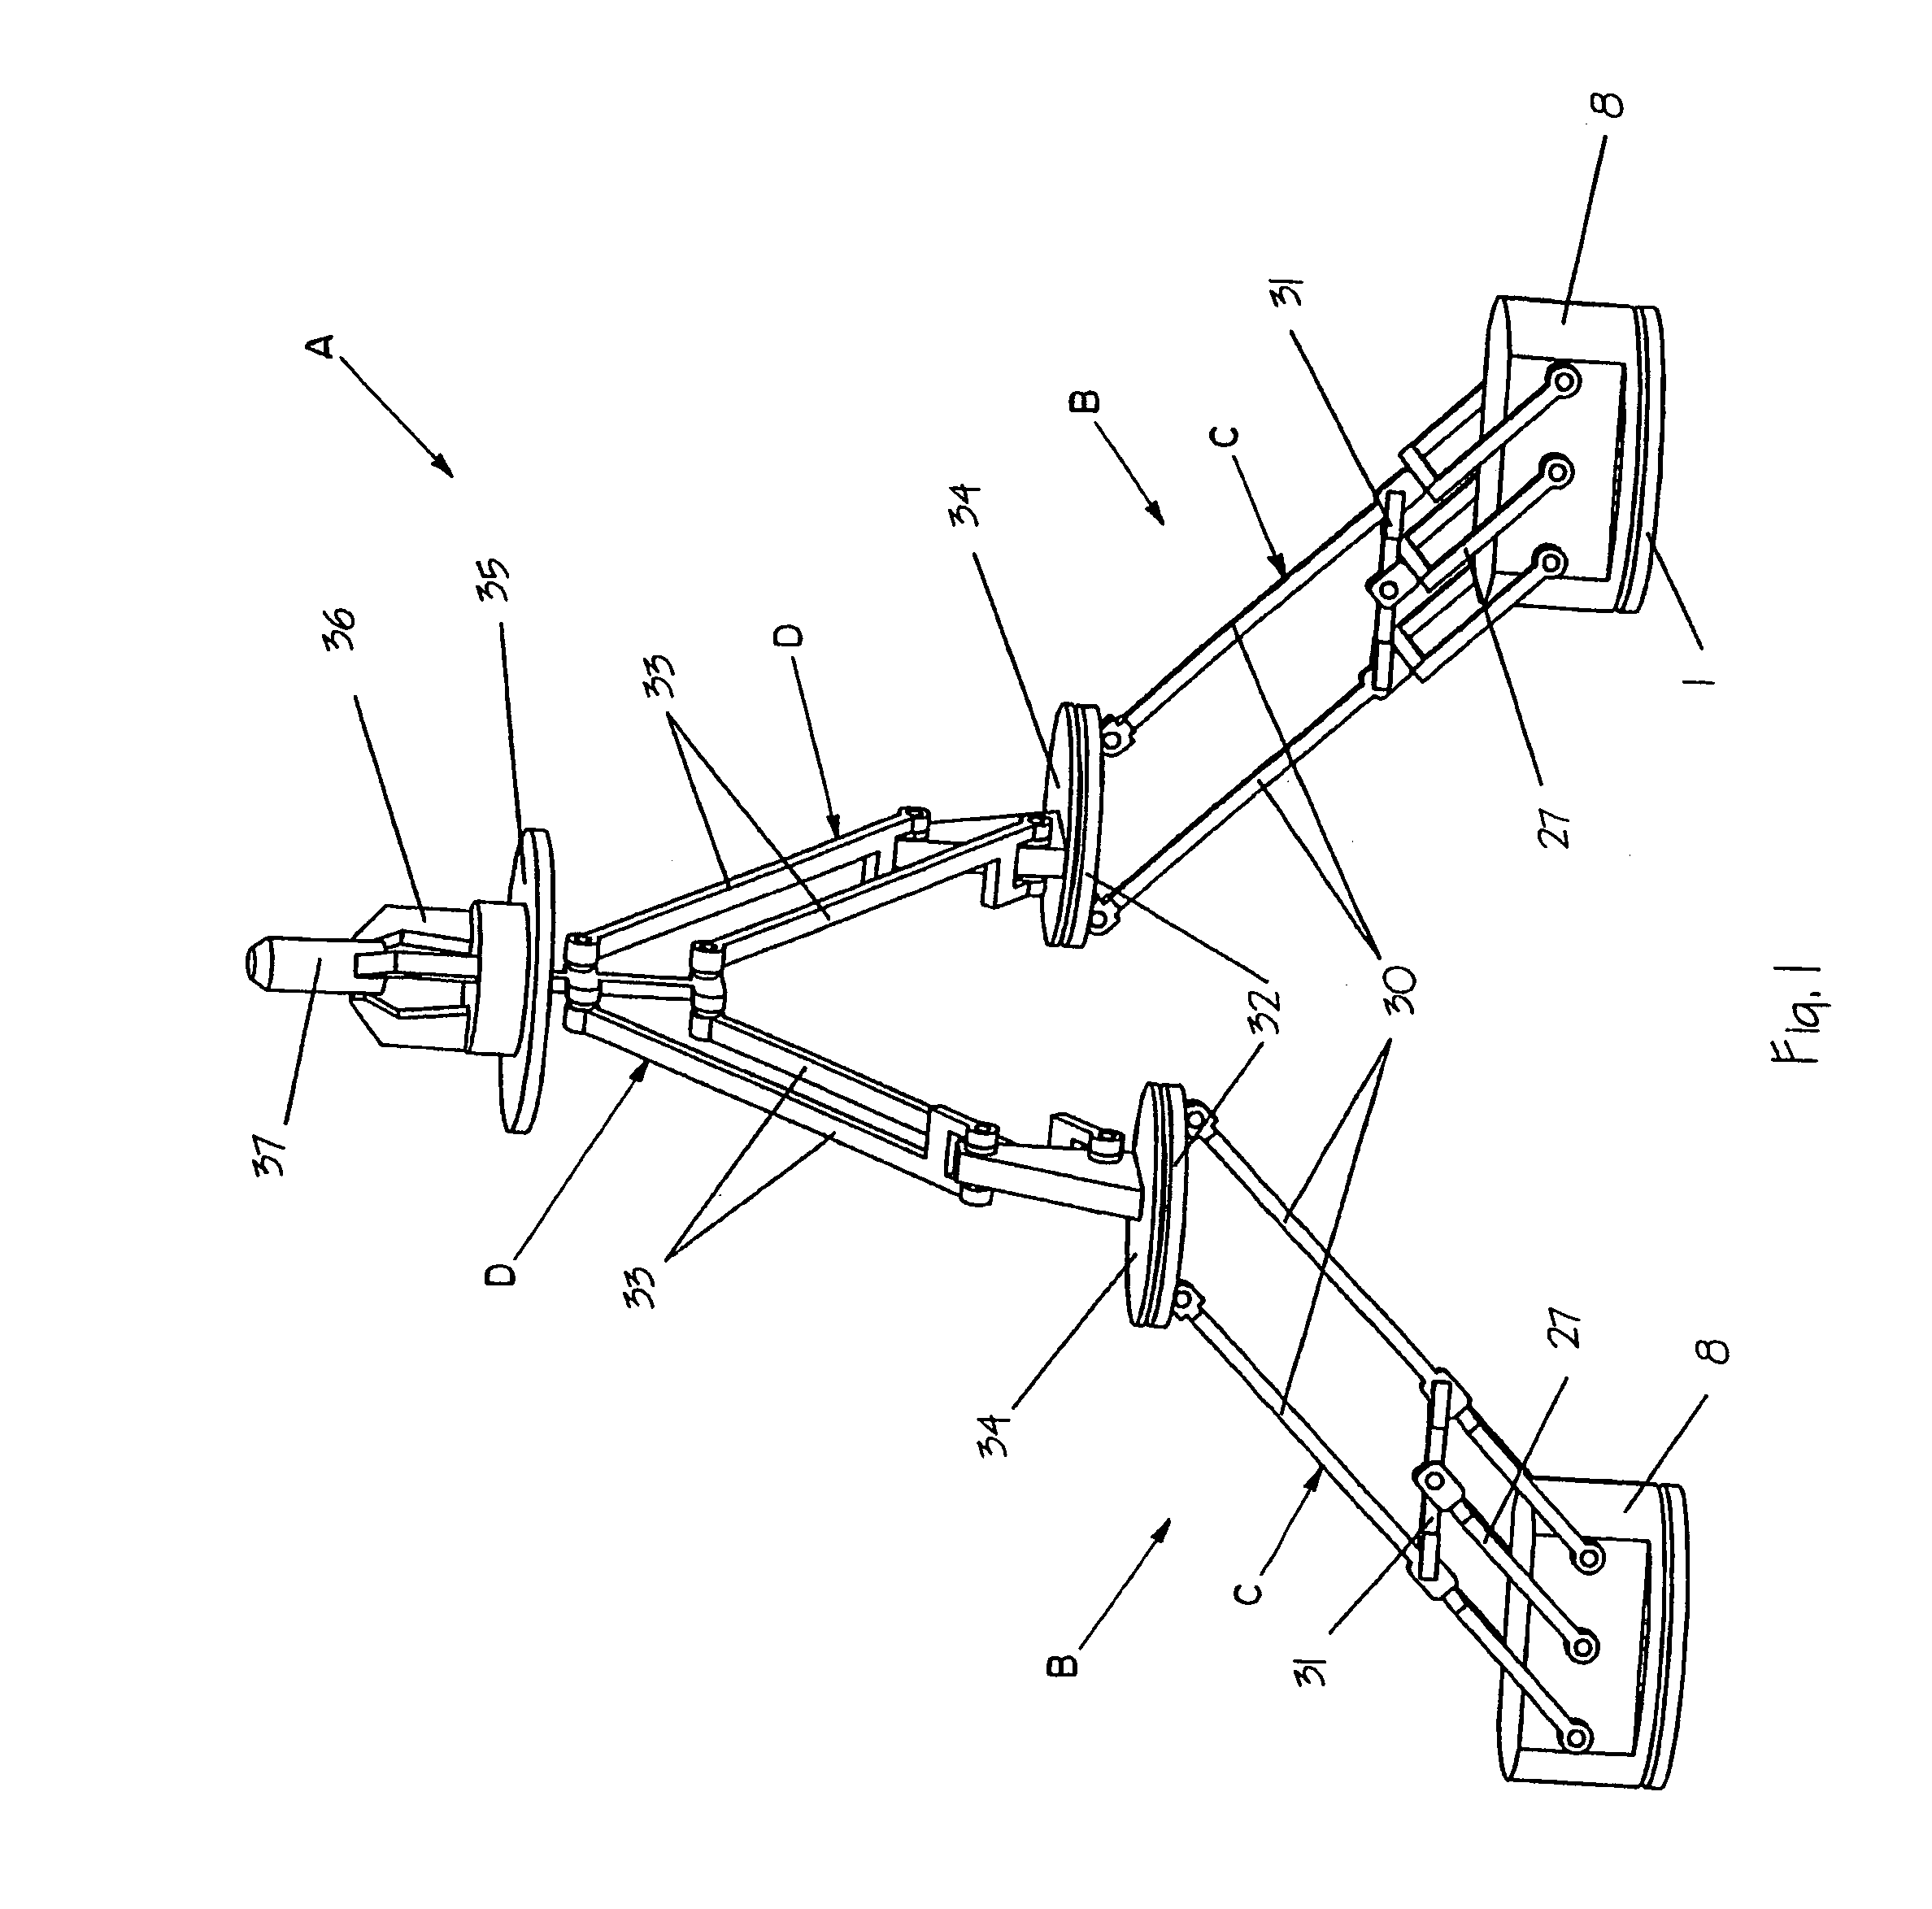 Four-degree-of-freedom parallel manipulator for producing Schönflies motions